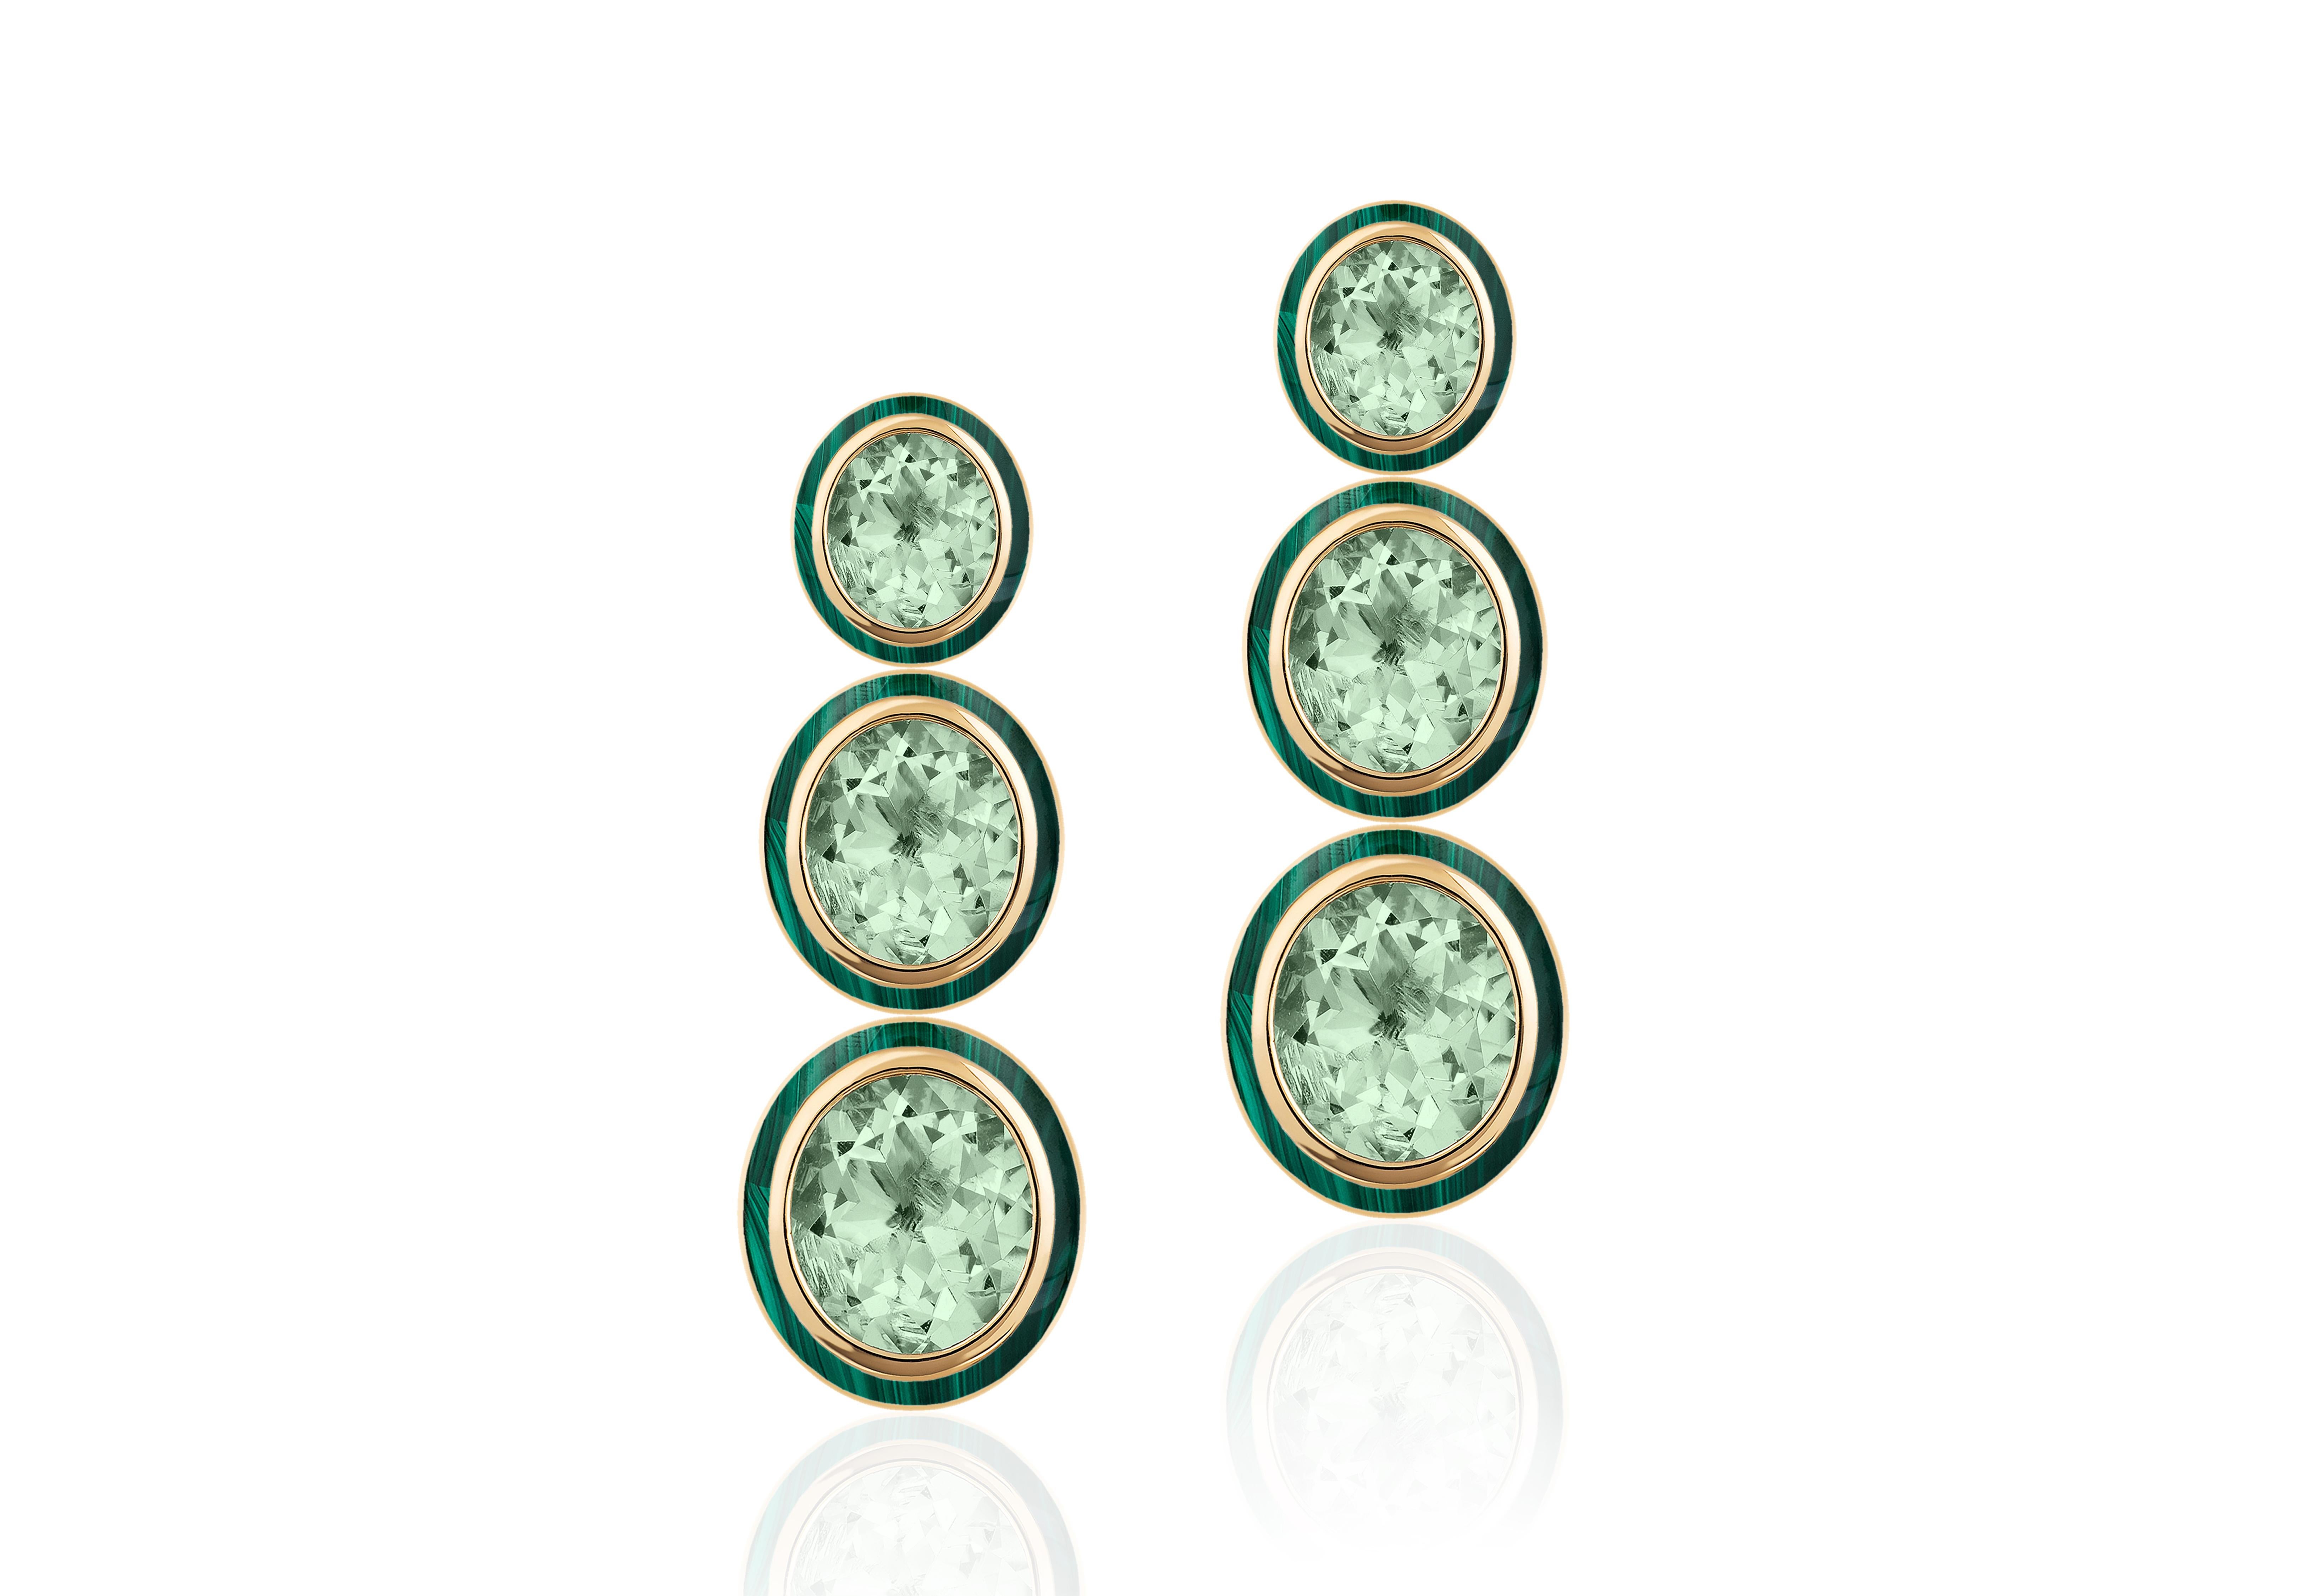 These 3 tier Oval Shape Prasiolite & Malachite Earrings in 18K Yellow Gold are an exquisite piece of jewelry from the 'Melange' Collection. The earrings feature three tiers of oval-shaped Prasiolite gemstone with Malachite border. The gemstones are